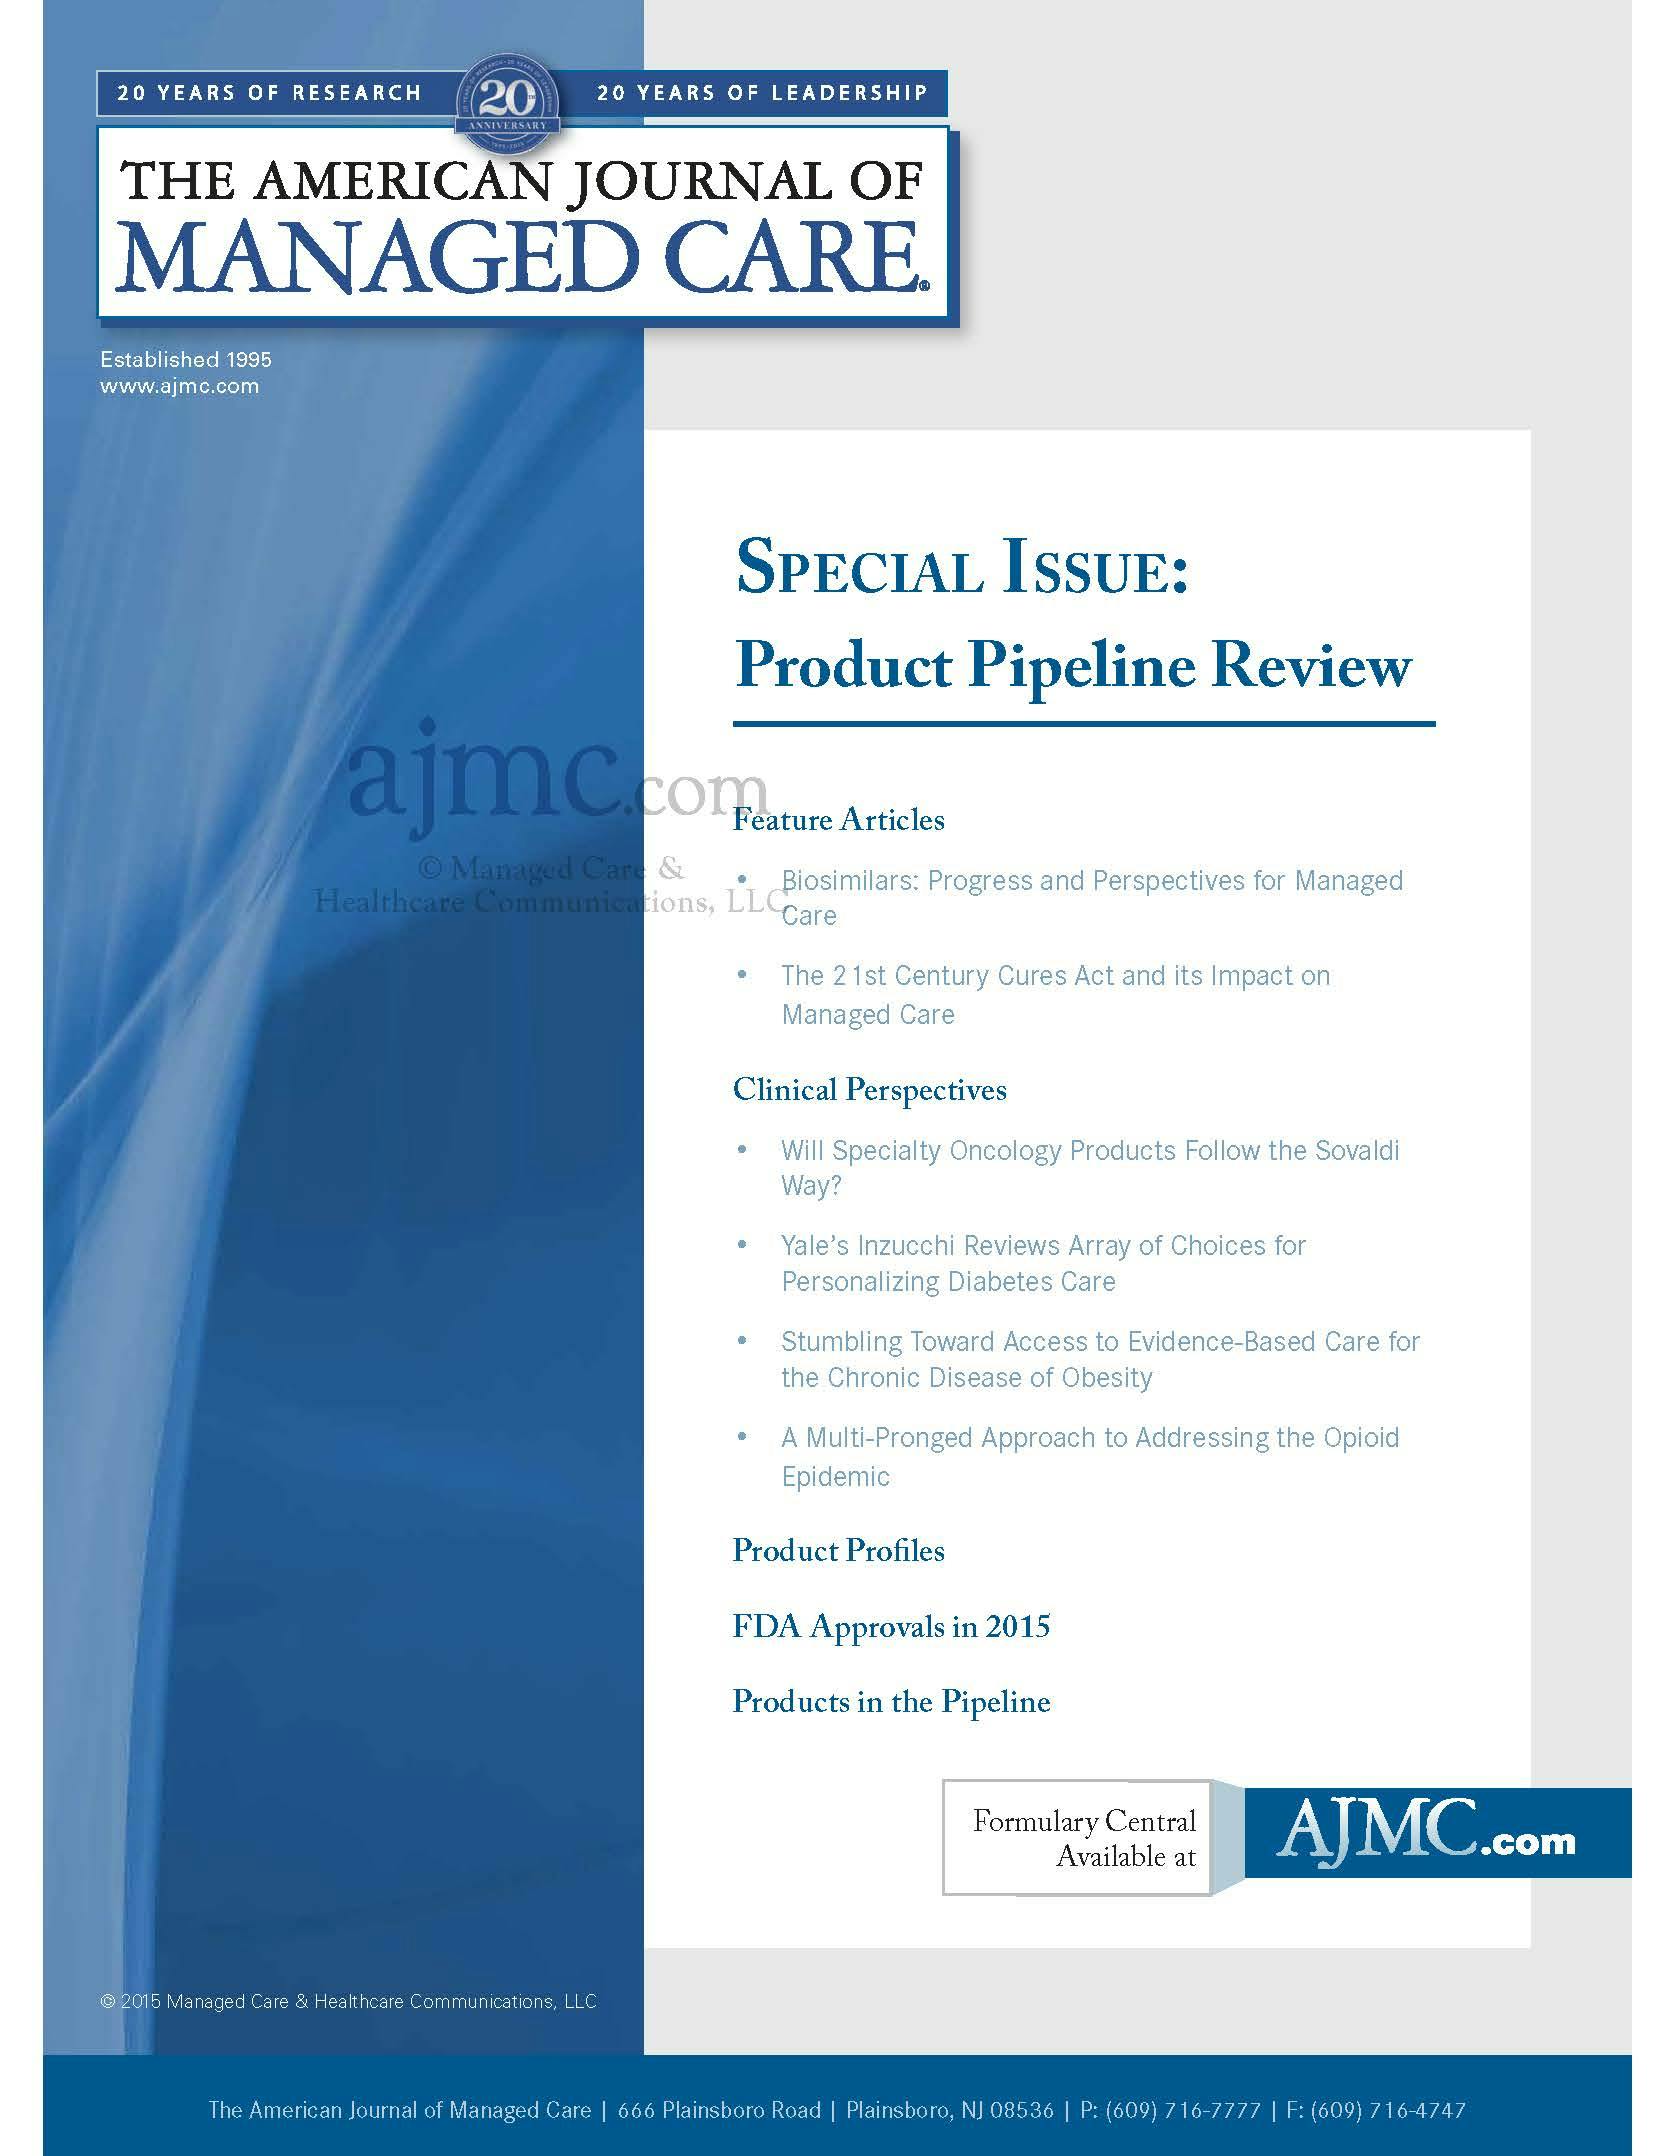 Special Issue: Product Pipeline Review [December 2015]